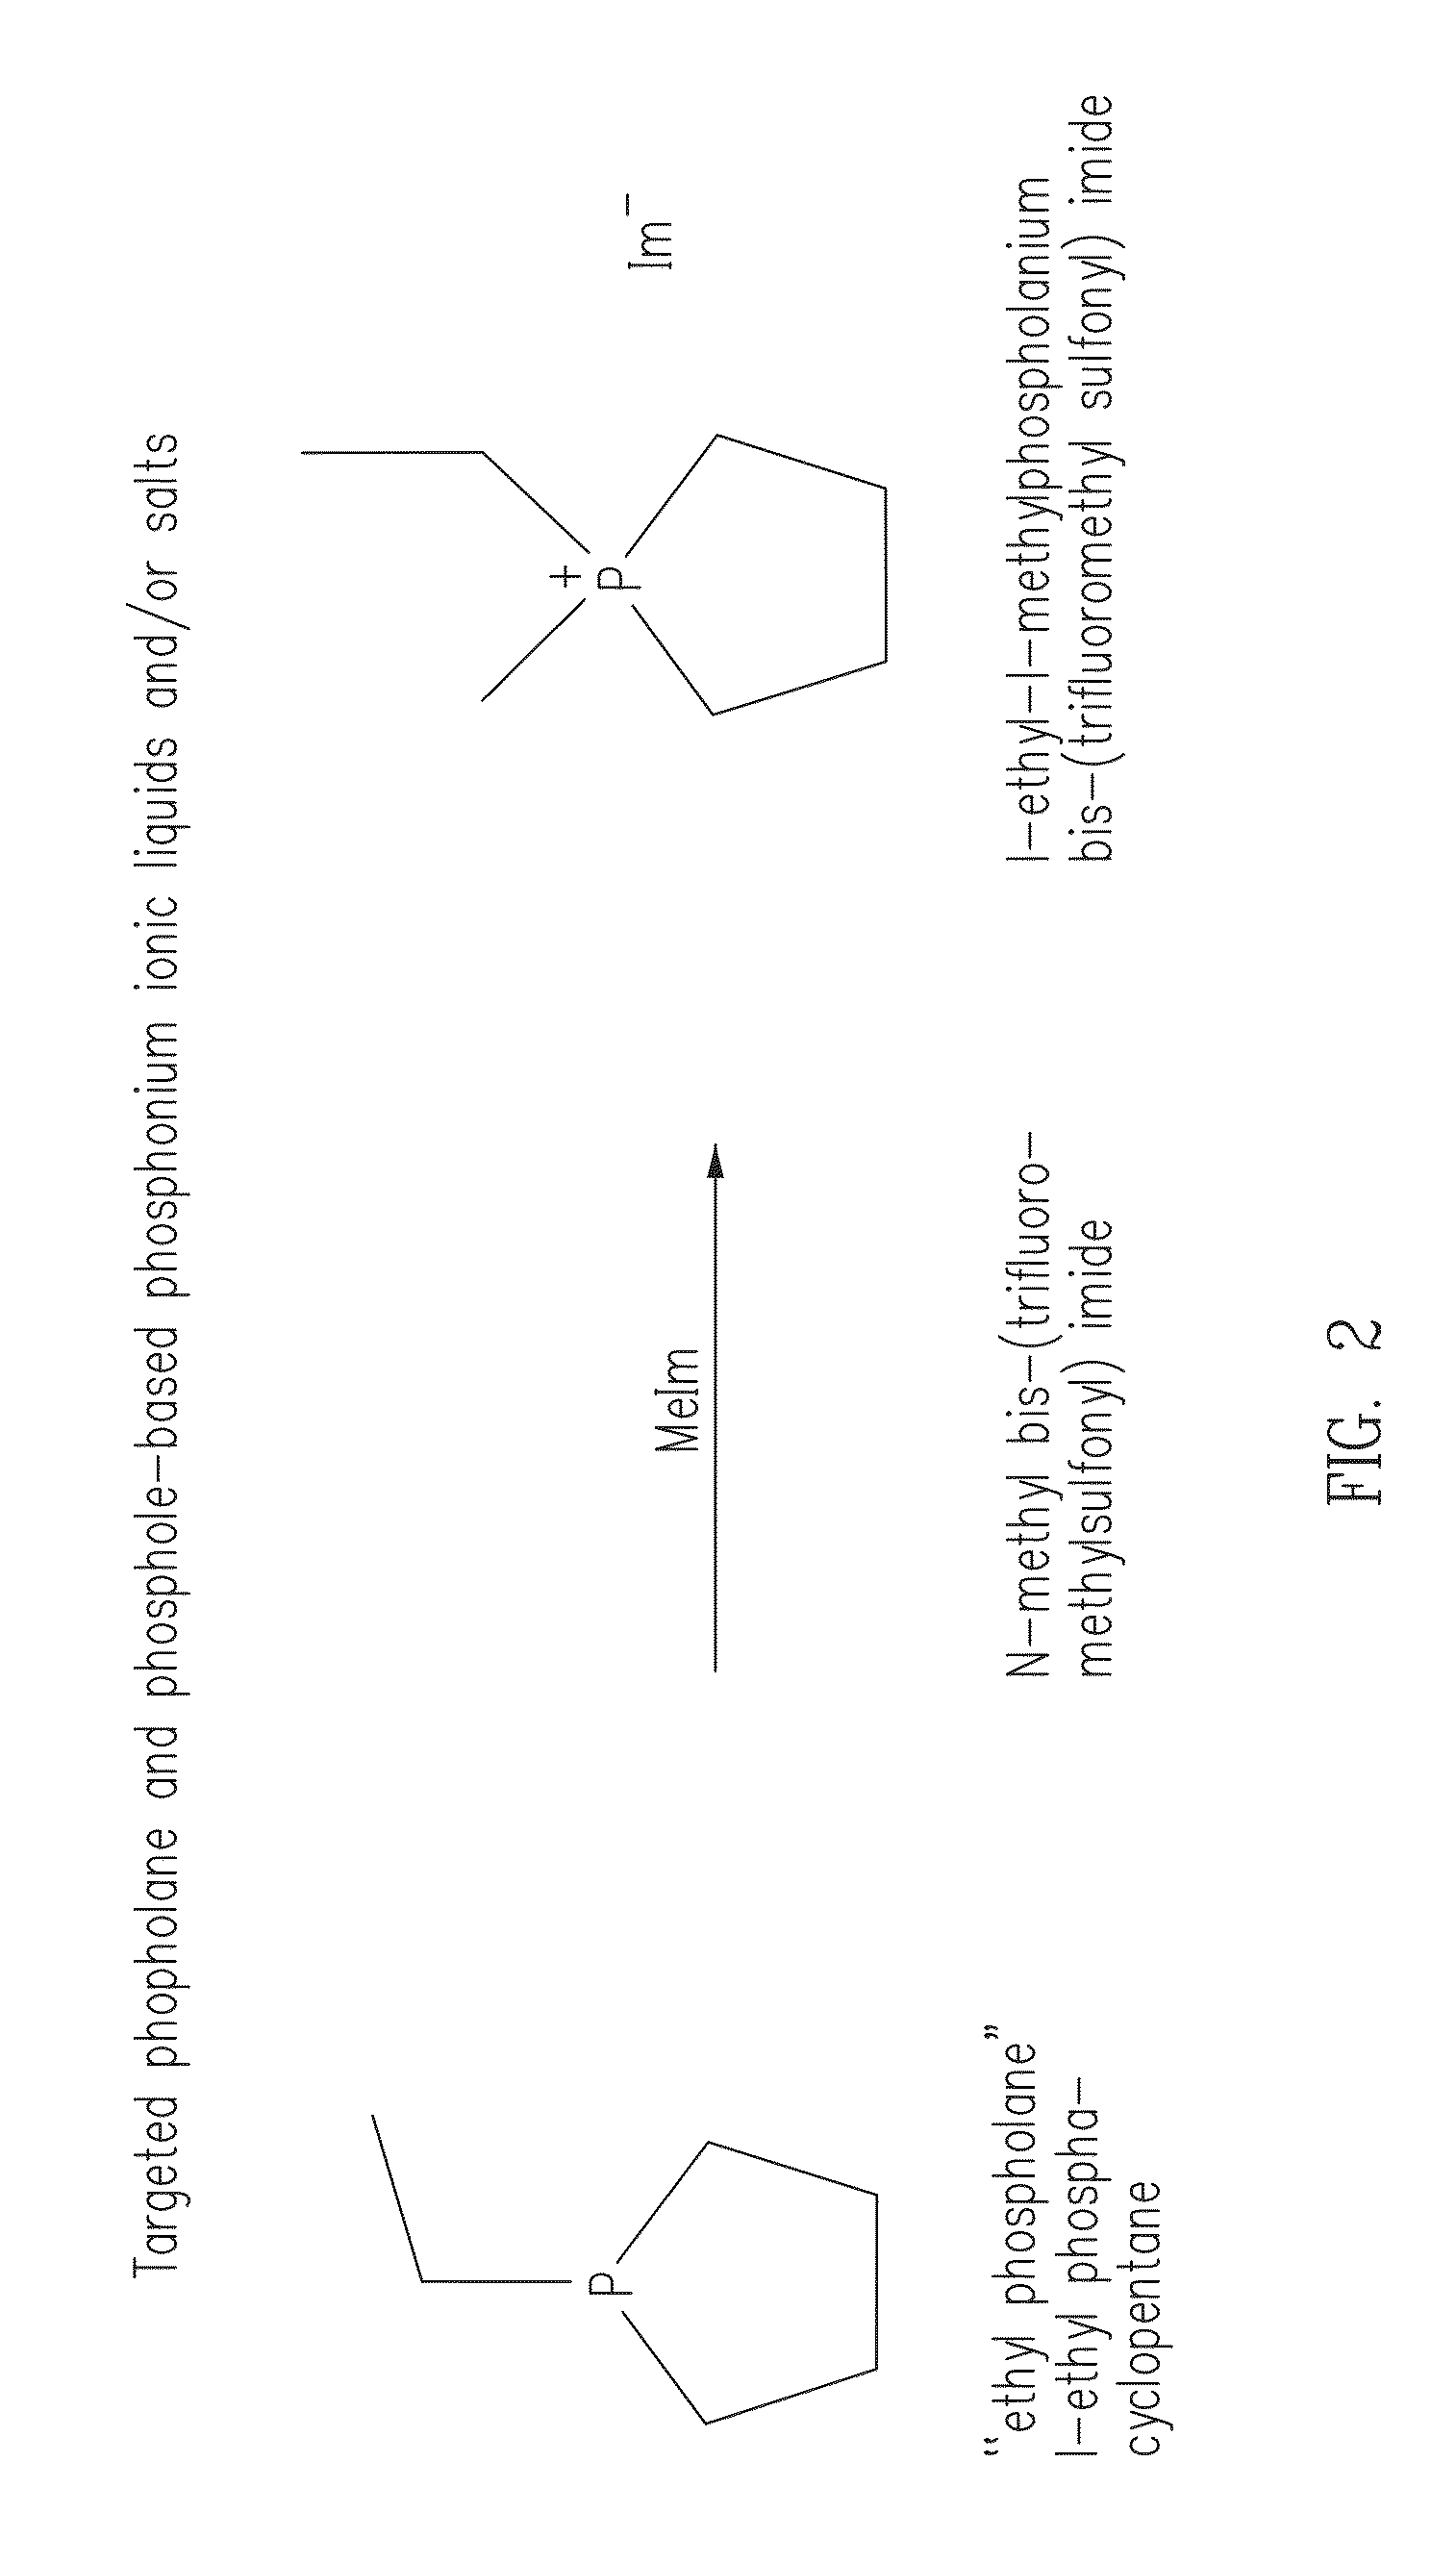 Phosphonium ionic liquids, salts, compositions, methods of making and devices formed there from